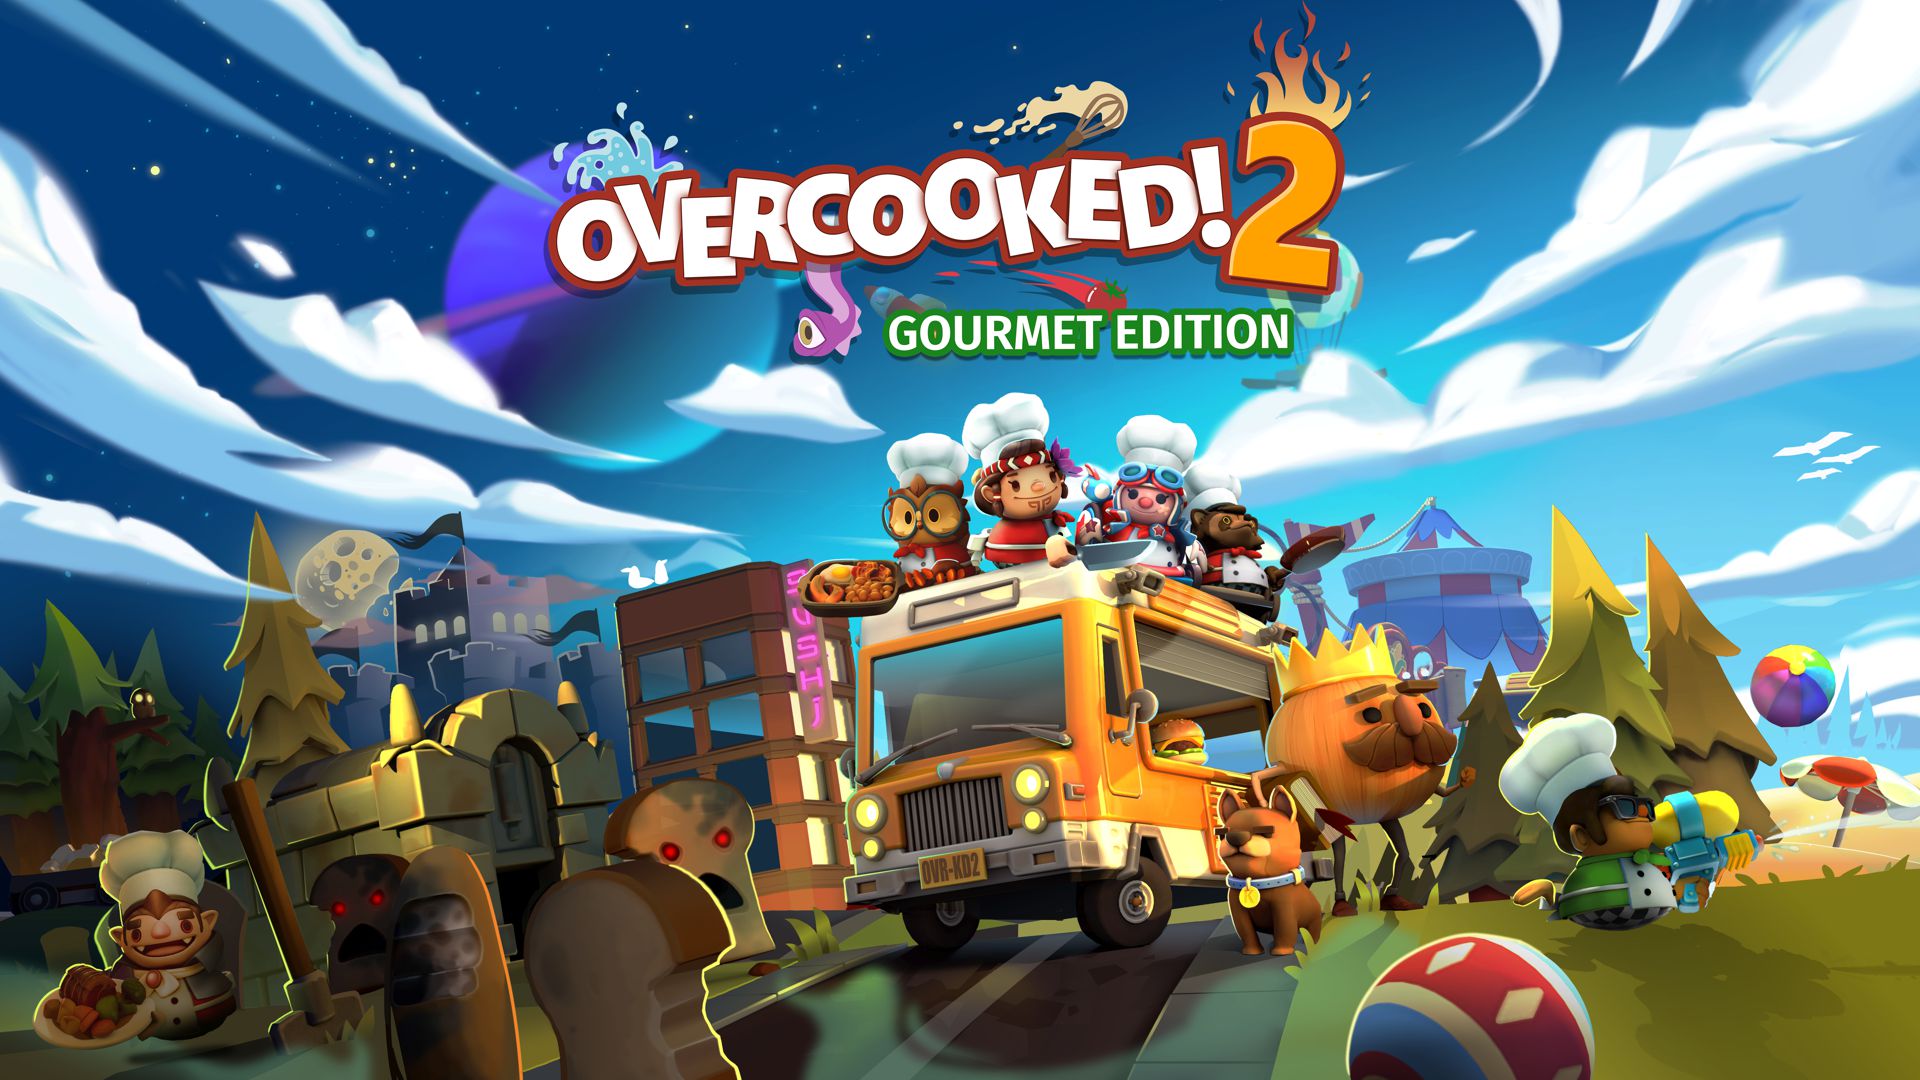 Overcooked! 2 Gourmet Edition